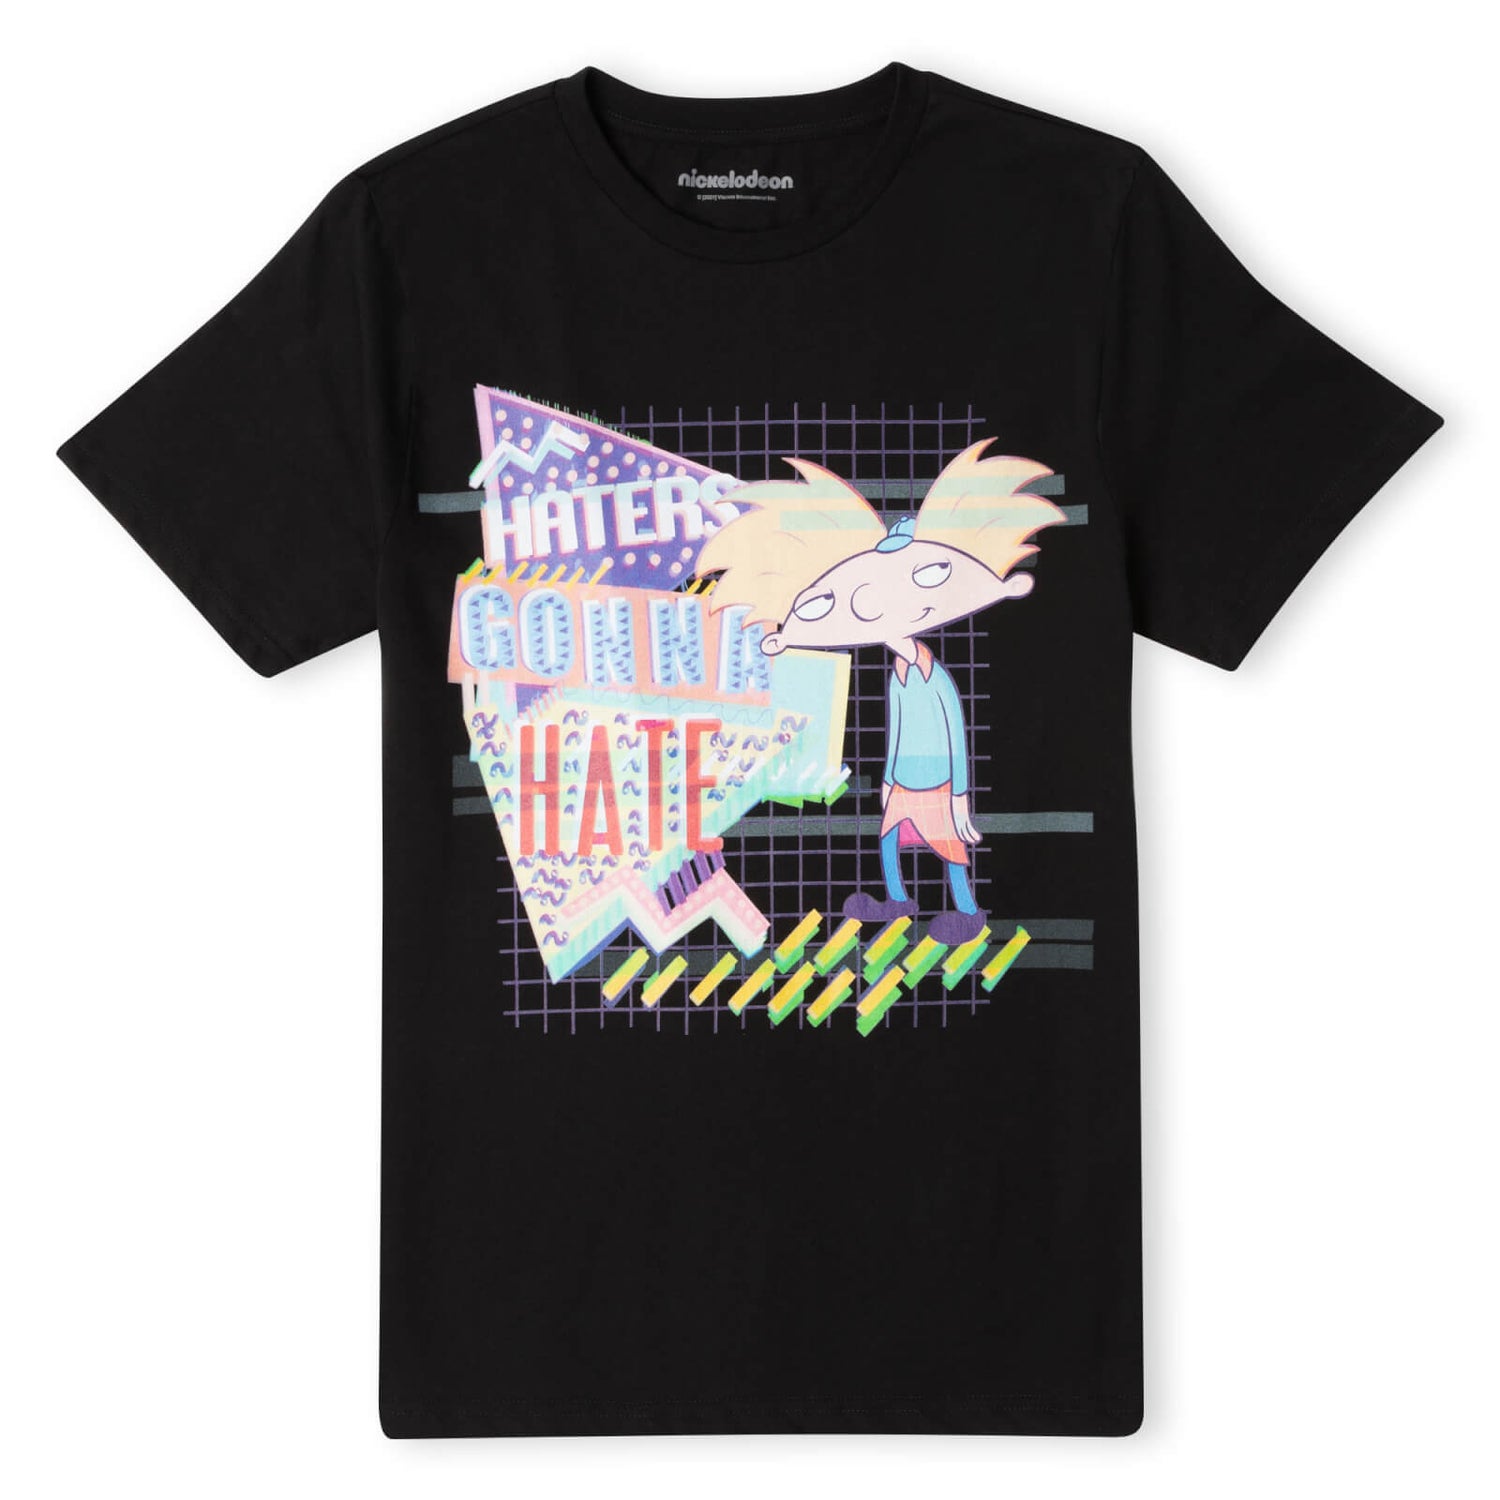 Nickelodeon Hey Arnold Haters Gonna Hate Unisex T-Shirt - Black